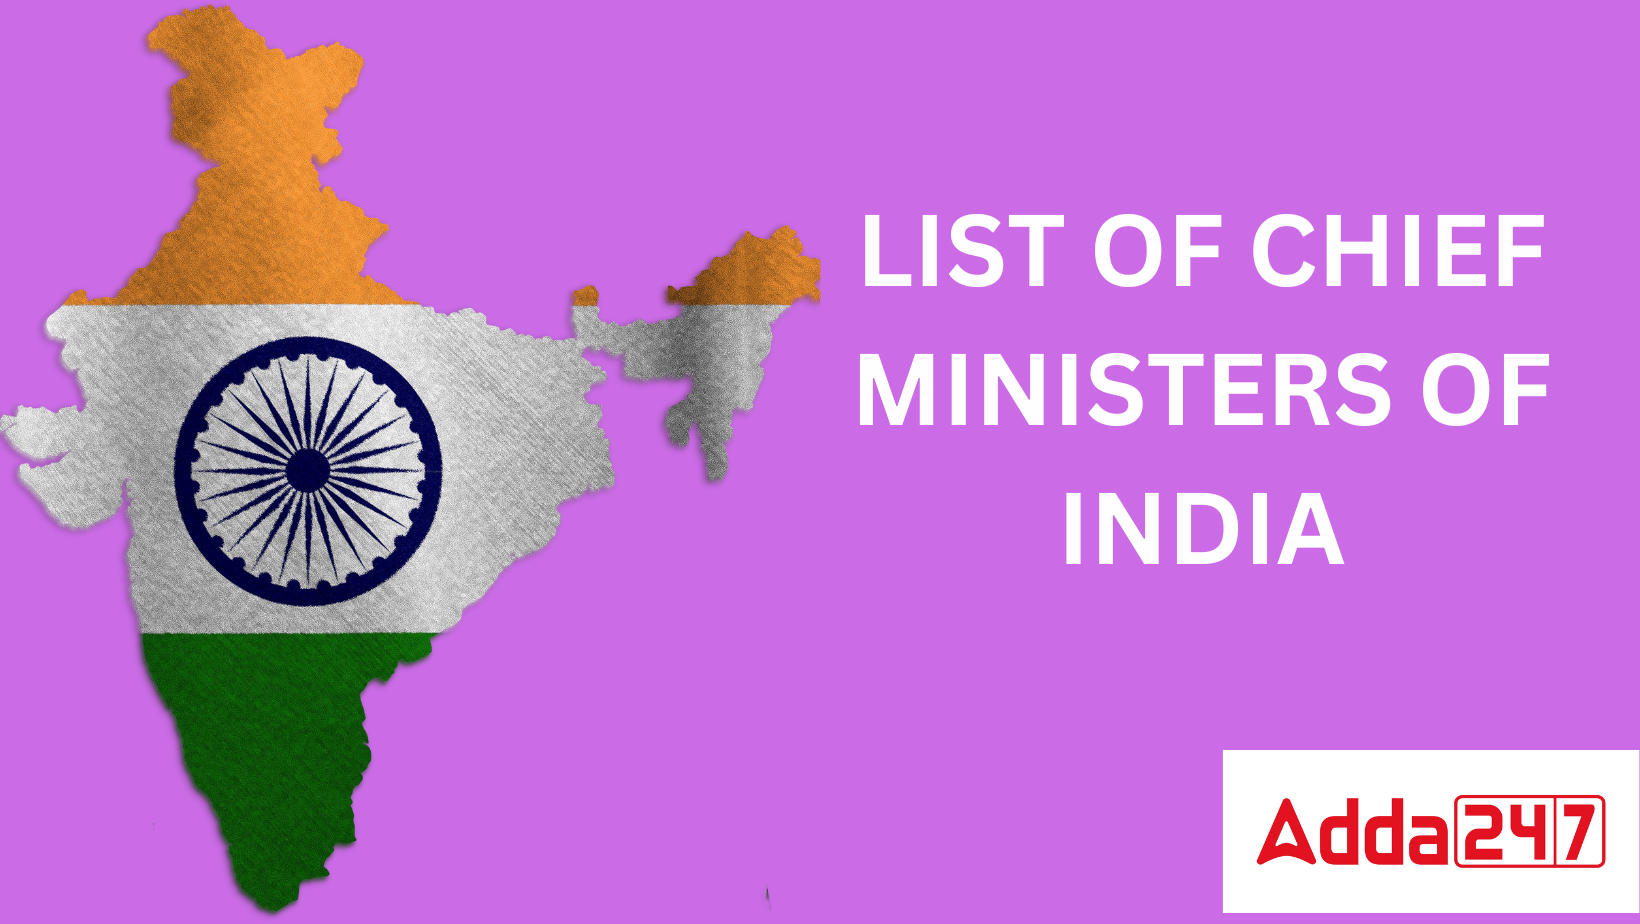 LIST OF CHIEF MINISTERS OF INDIA